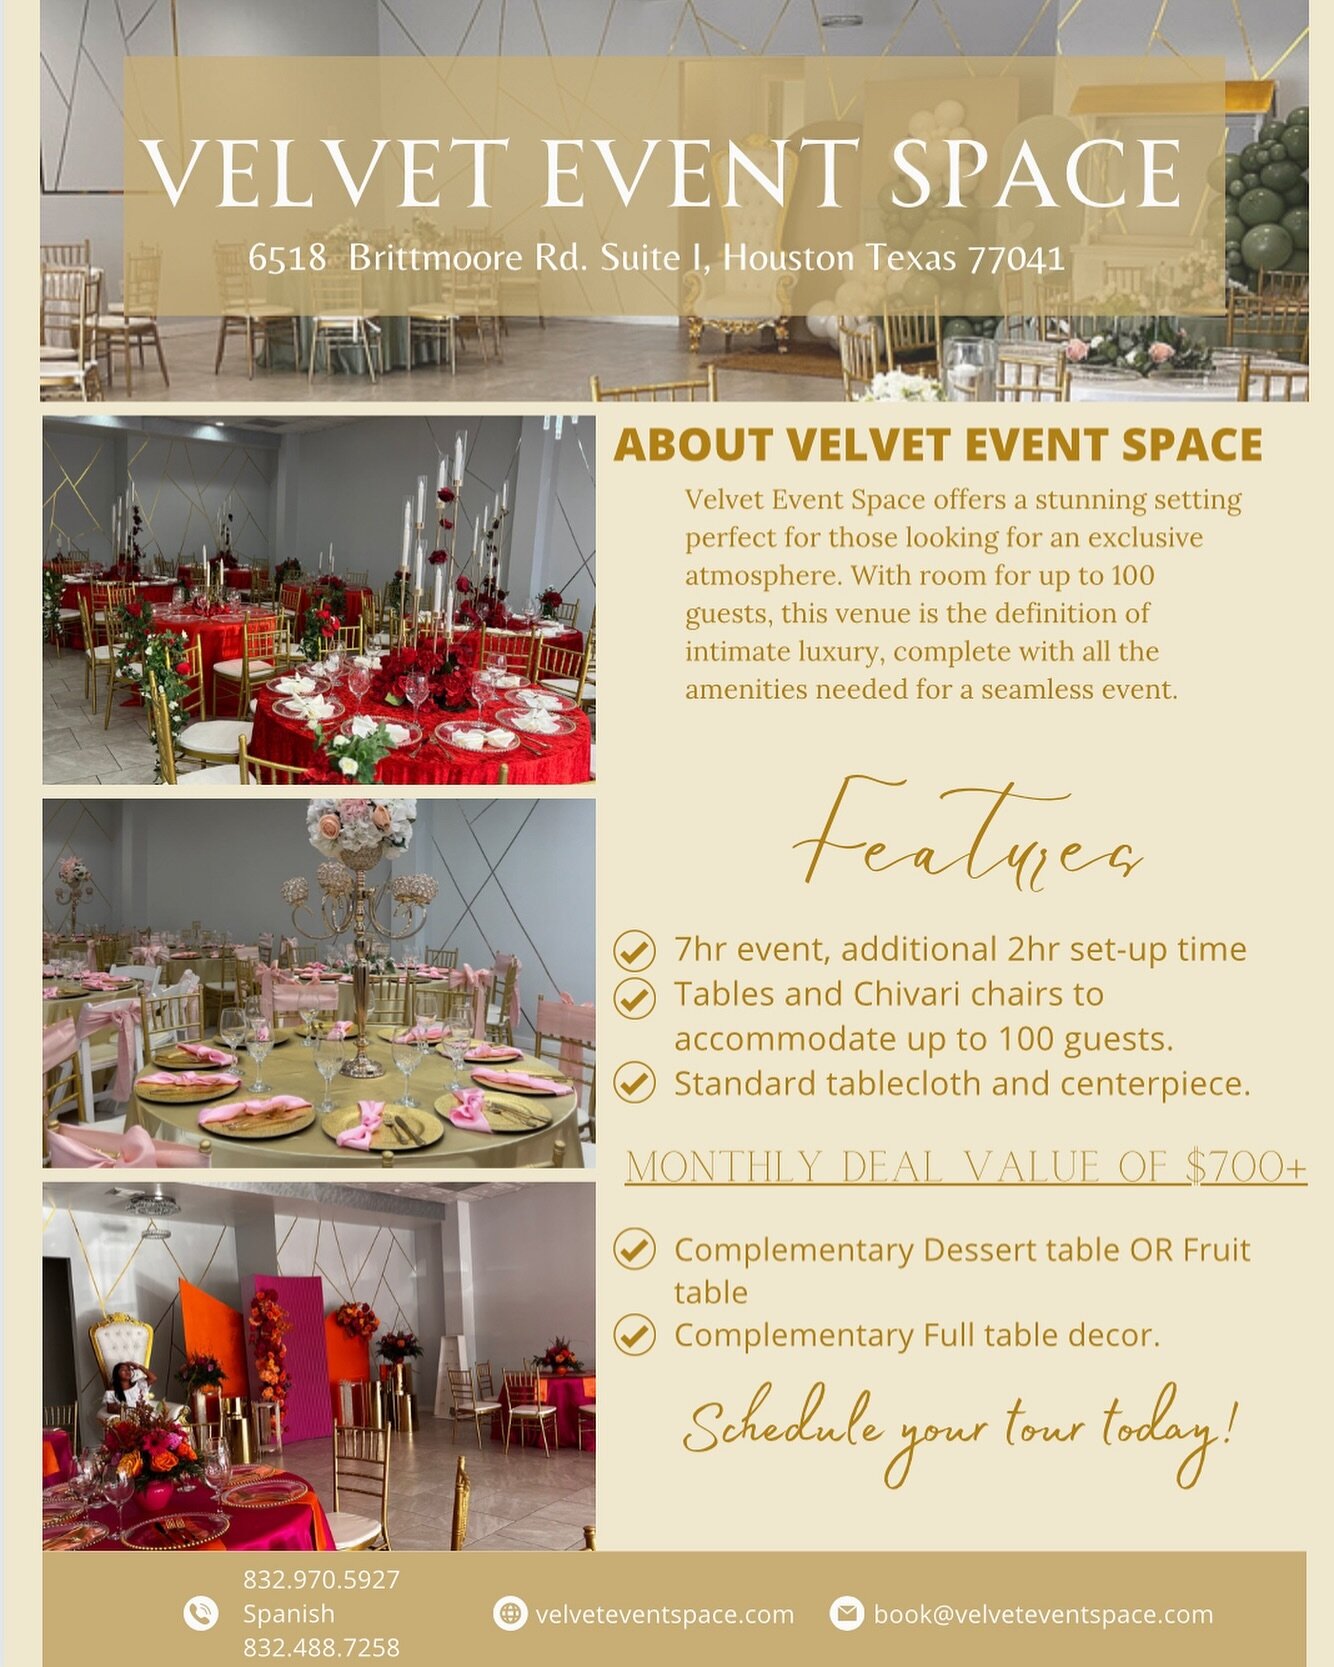 Looking for the perfect venue to host your next event? Our velvet event space is the epitome of style and class, ensuring an unforgettable experience for you and your guests. 

Velvet Event Space includes: 
- 7hr events 
- Tables and Chiavari chairs
